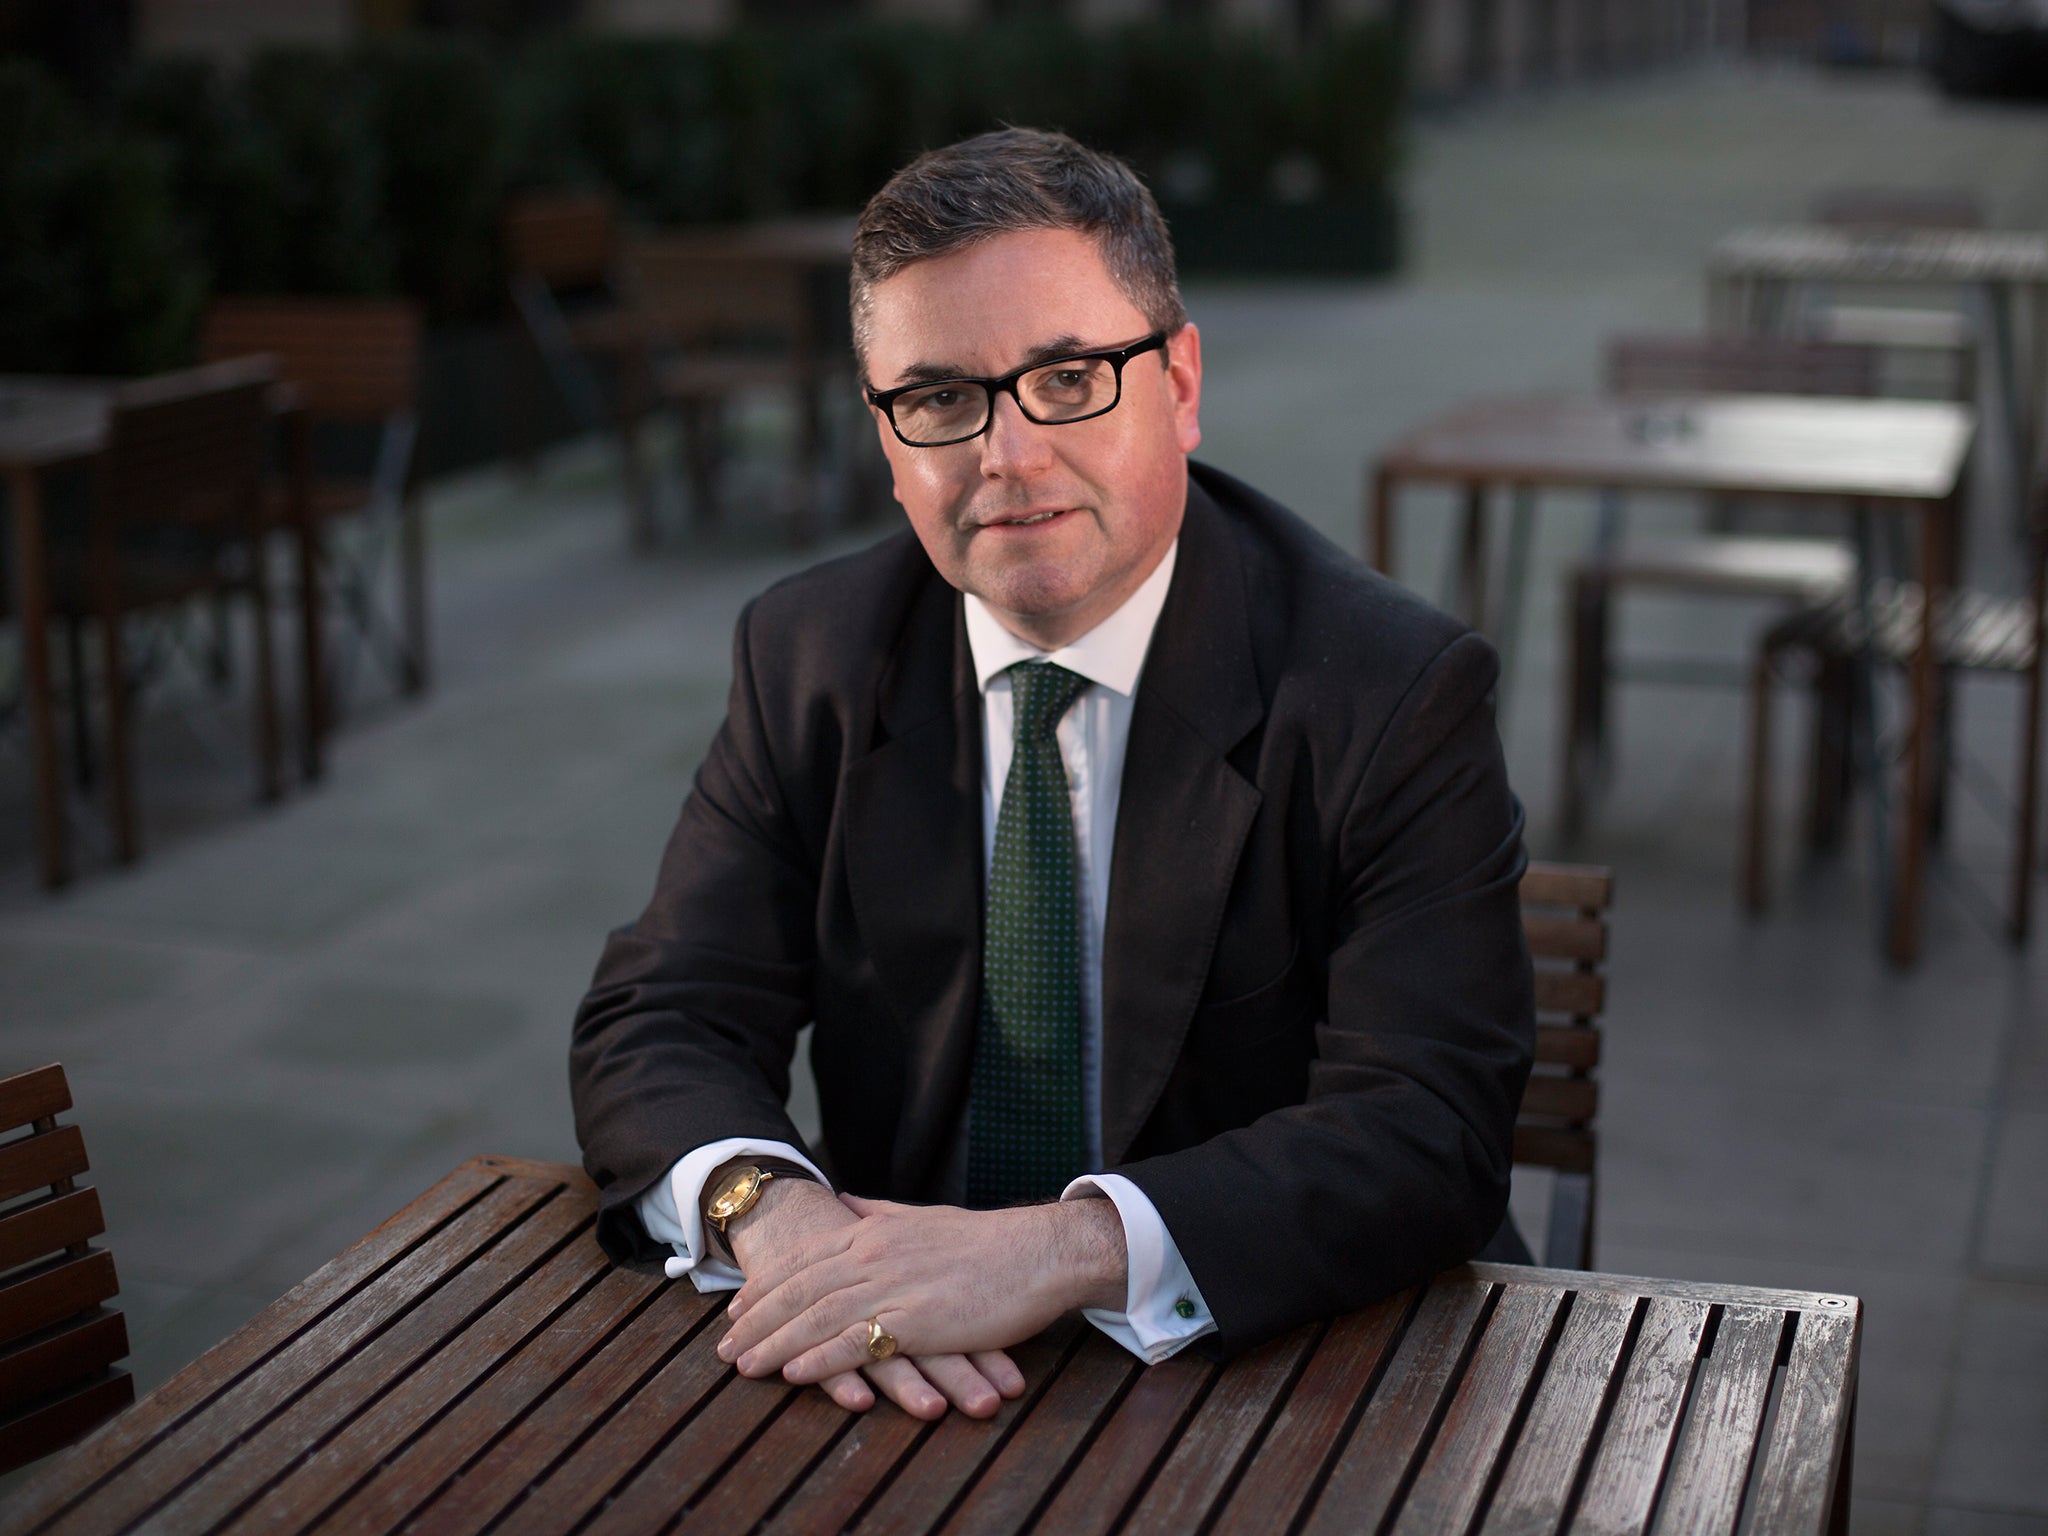 Solicitor General Robert Buckland says male victims of domestic abuse are often overlooked